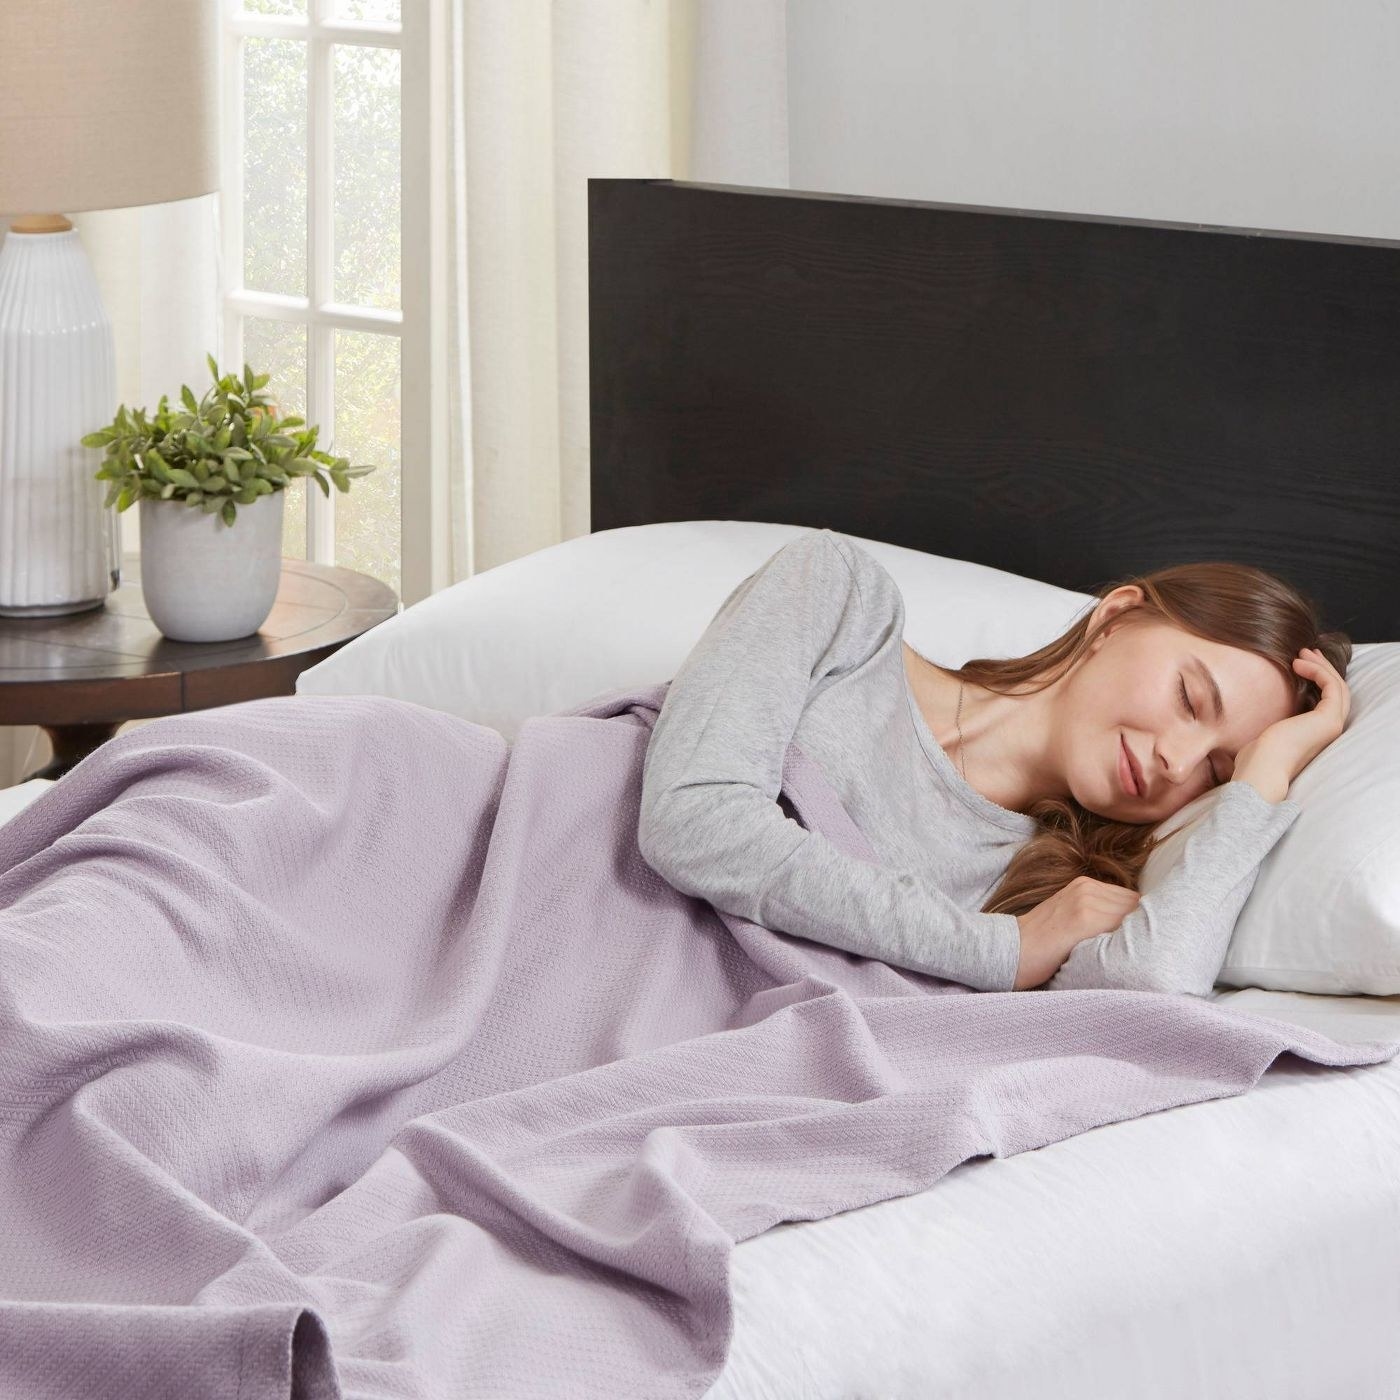 A woman sleeps comfortably in a lavender colored blanket